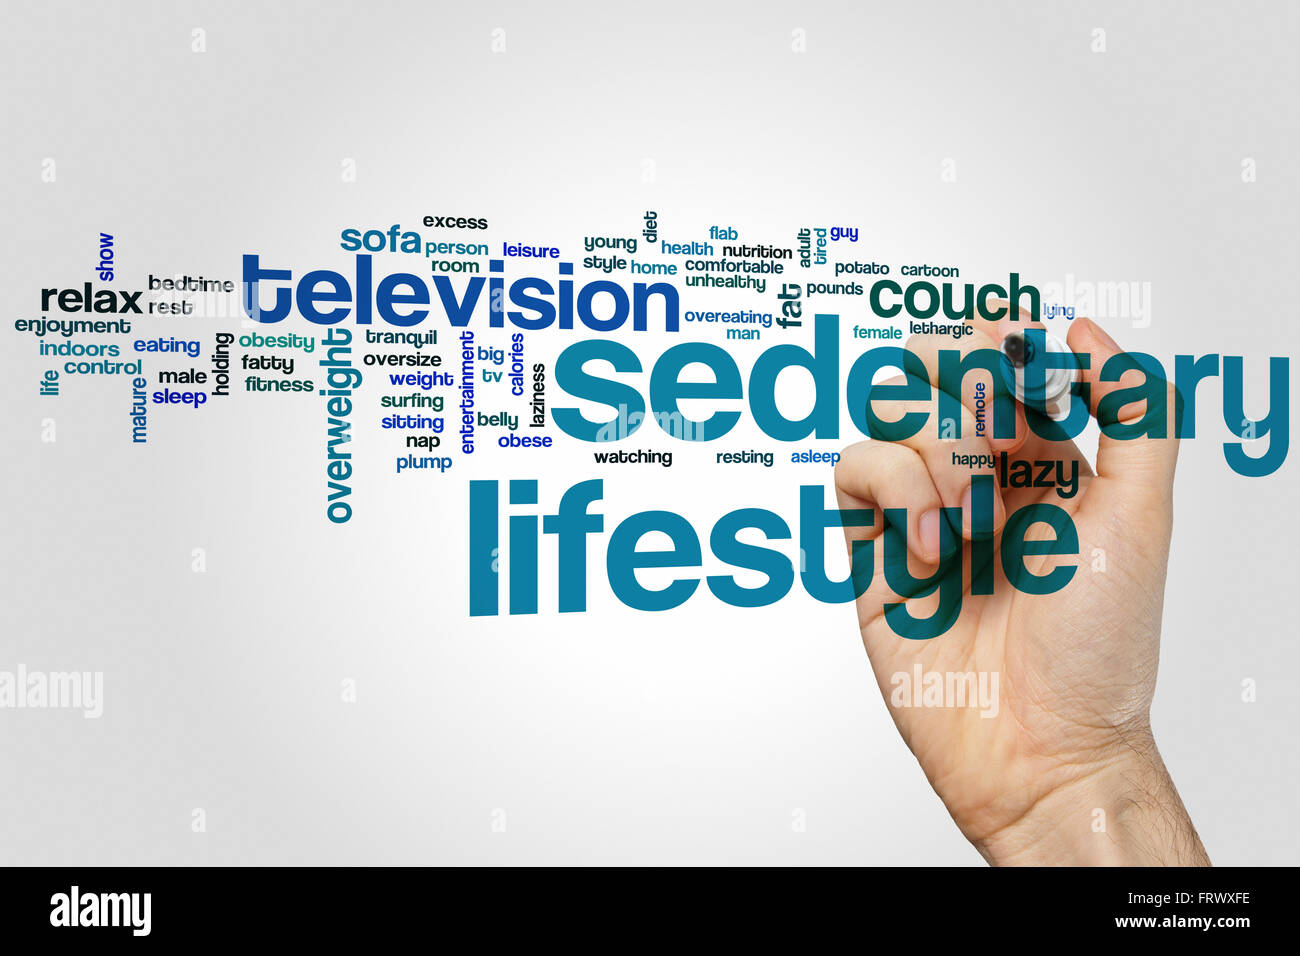 Sedentary lifestyle word cloud concept Stock Photo